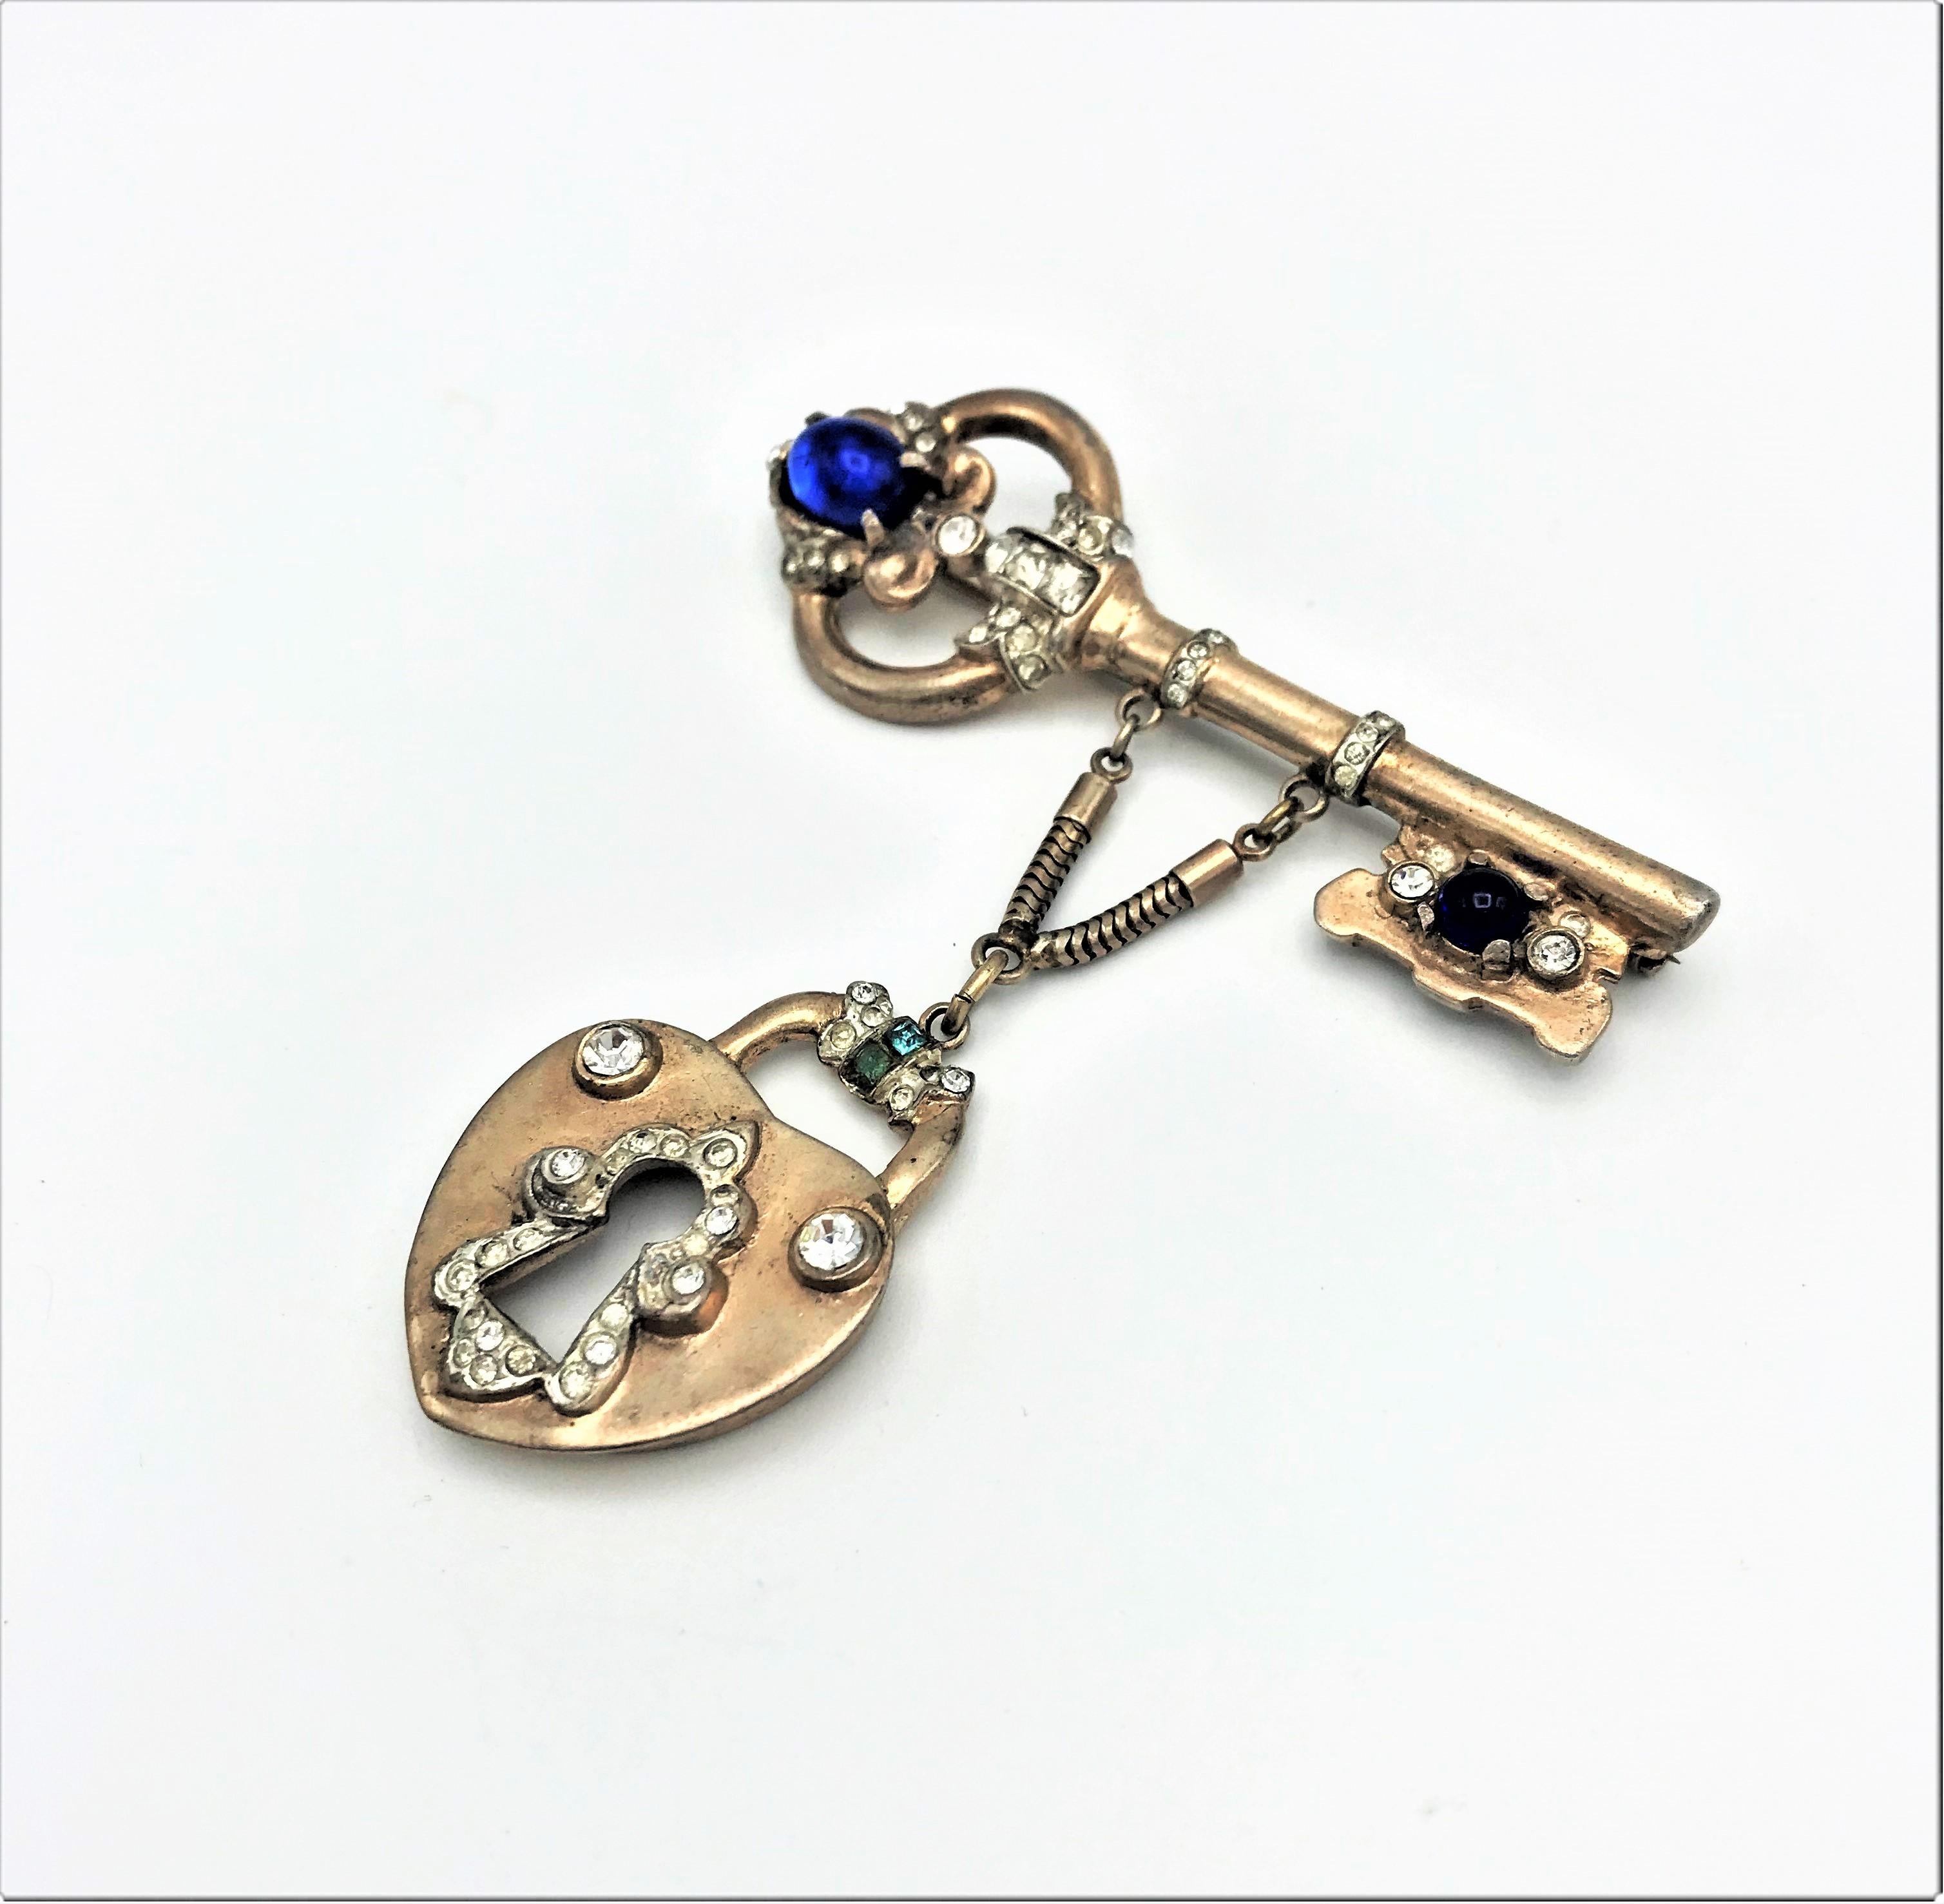 A key-shaped brooch with an attached lock designed by Coro Craft in the 1940s in sterling gold plated.  Decorated with blue rhinestones and small clear rhinestones.
Measurement: Key wide 7 cm x 2,5 cm, the full length with the lock 8 cm . Good